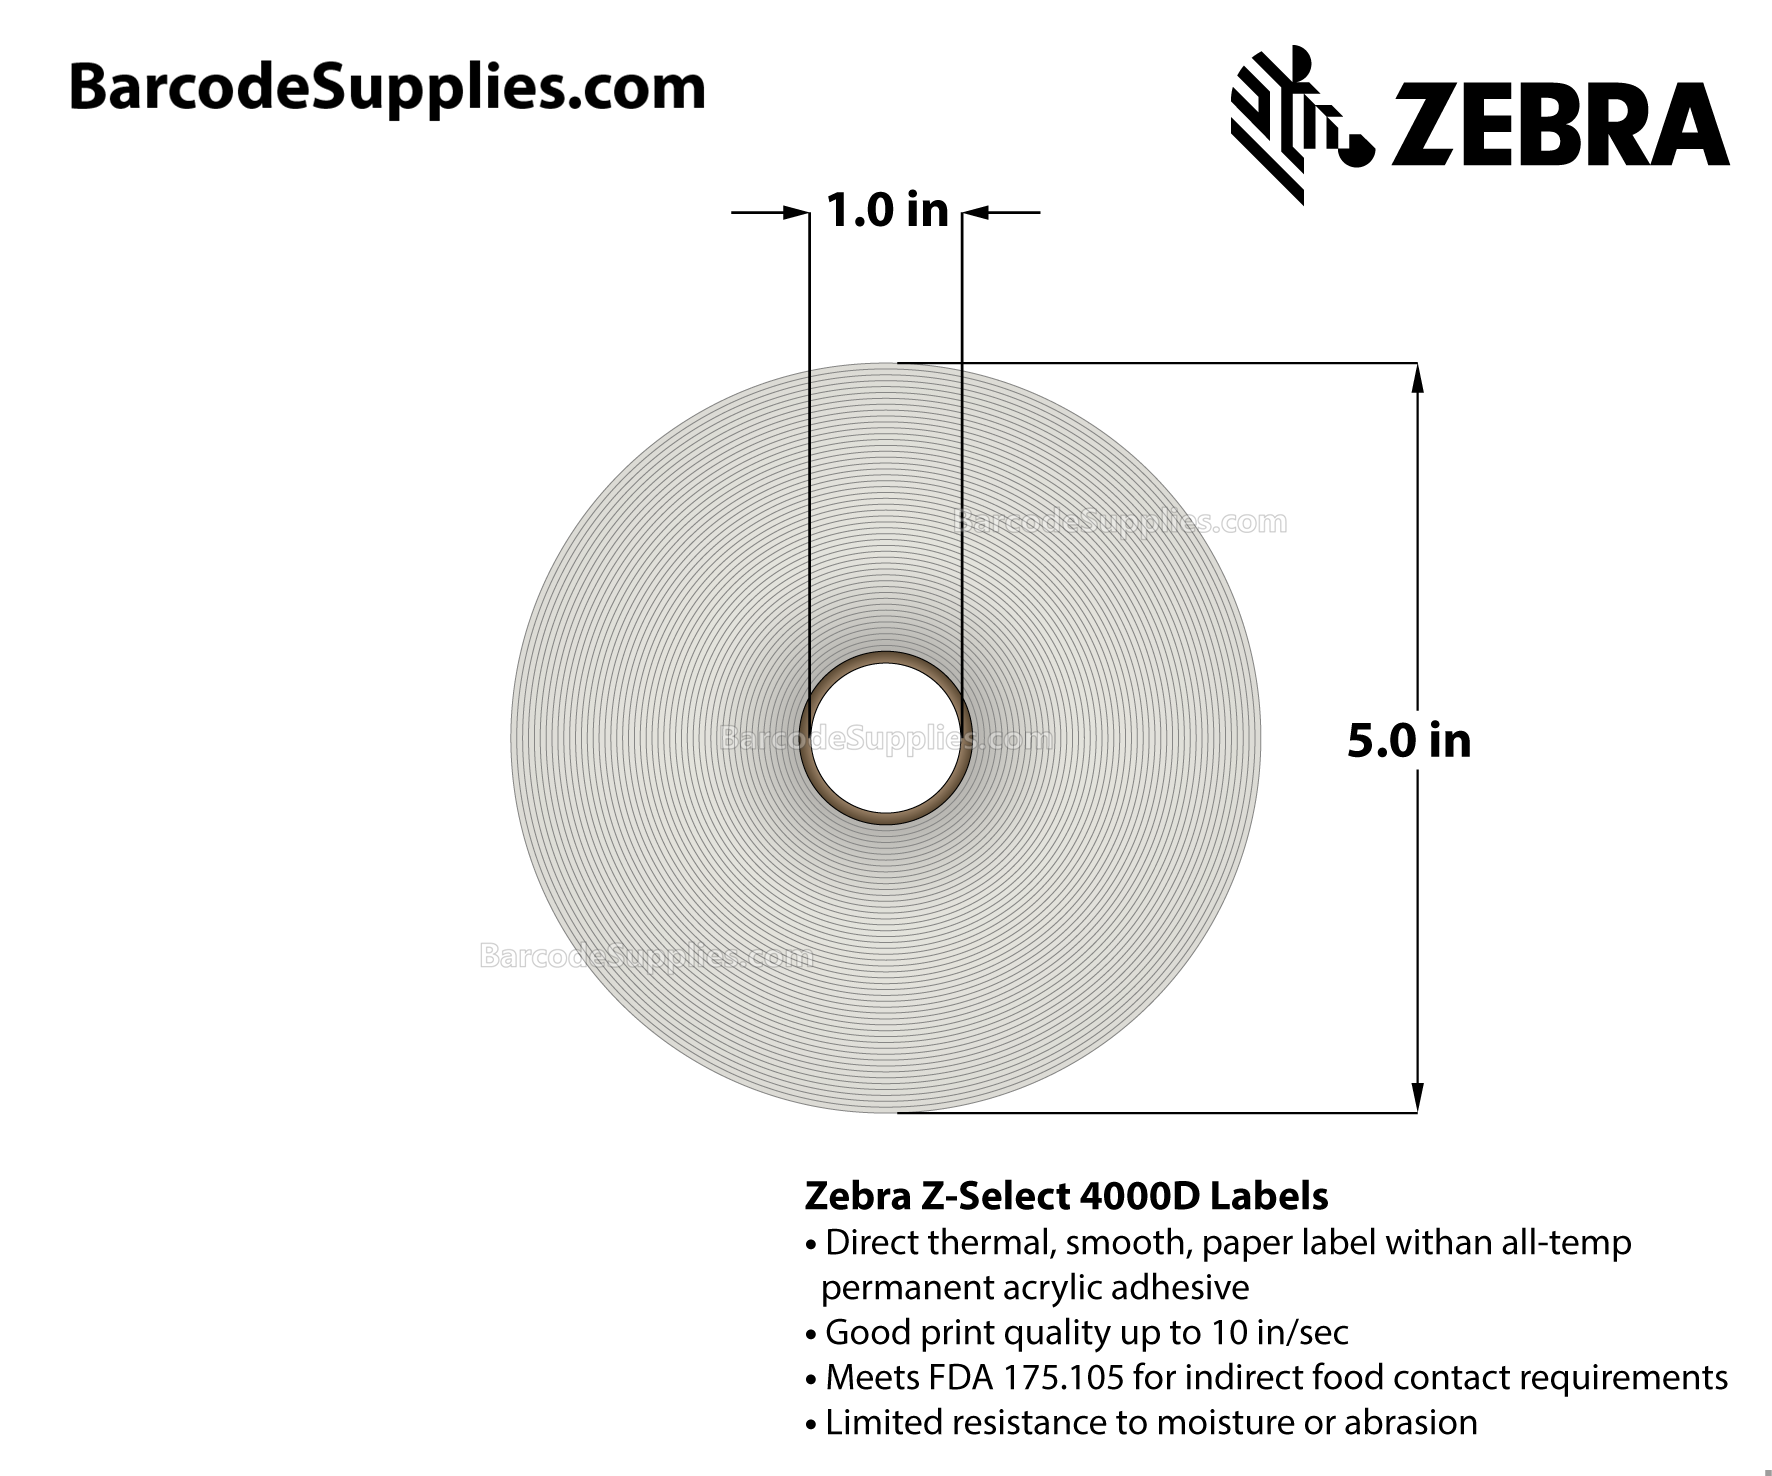 2.25 x 2 Direct Thermal White Z-Select 4000D Labels With Permanent Adhesive - Perforated - 1370 Labels Per Roll - Carton Of 12 Rolls - 16440 Labels Total - MPN: 10015342